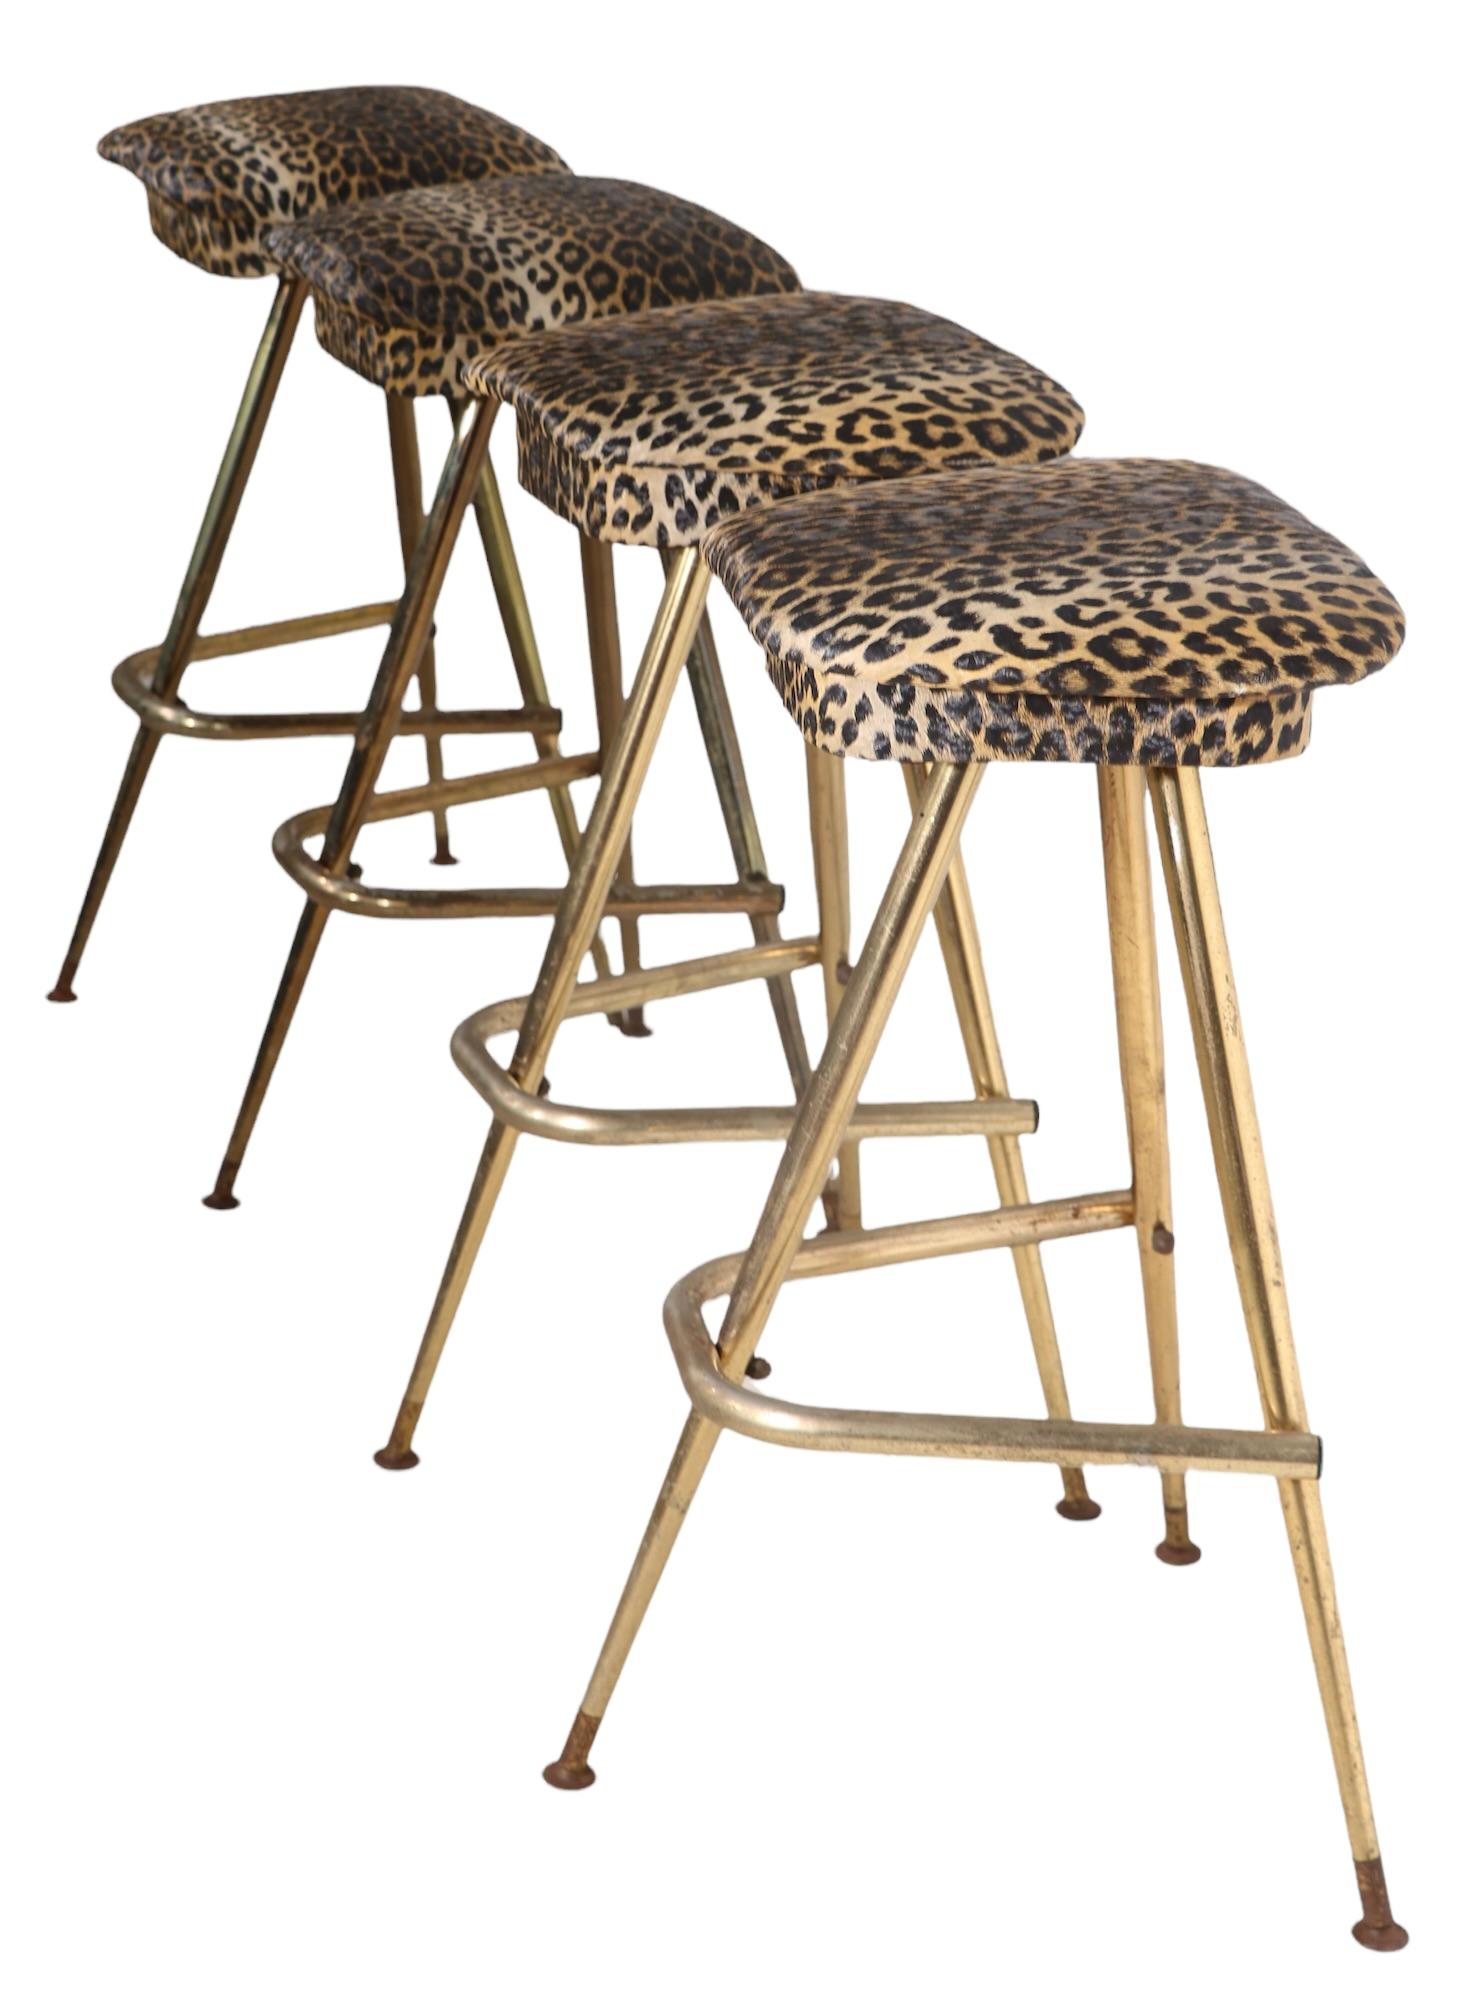 Counter Dry Bar with Matching Stools in Cheetah Vinyl ca 1950/1960's Made in USA 5